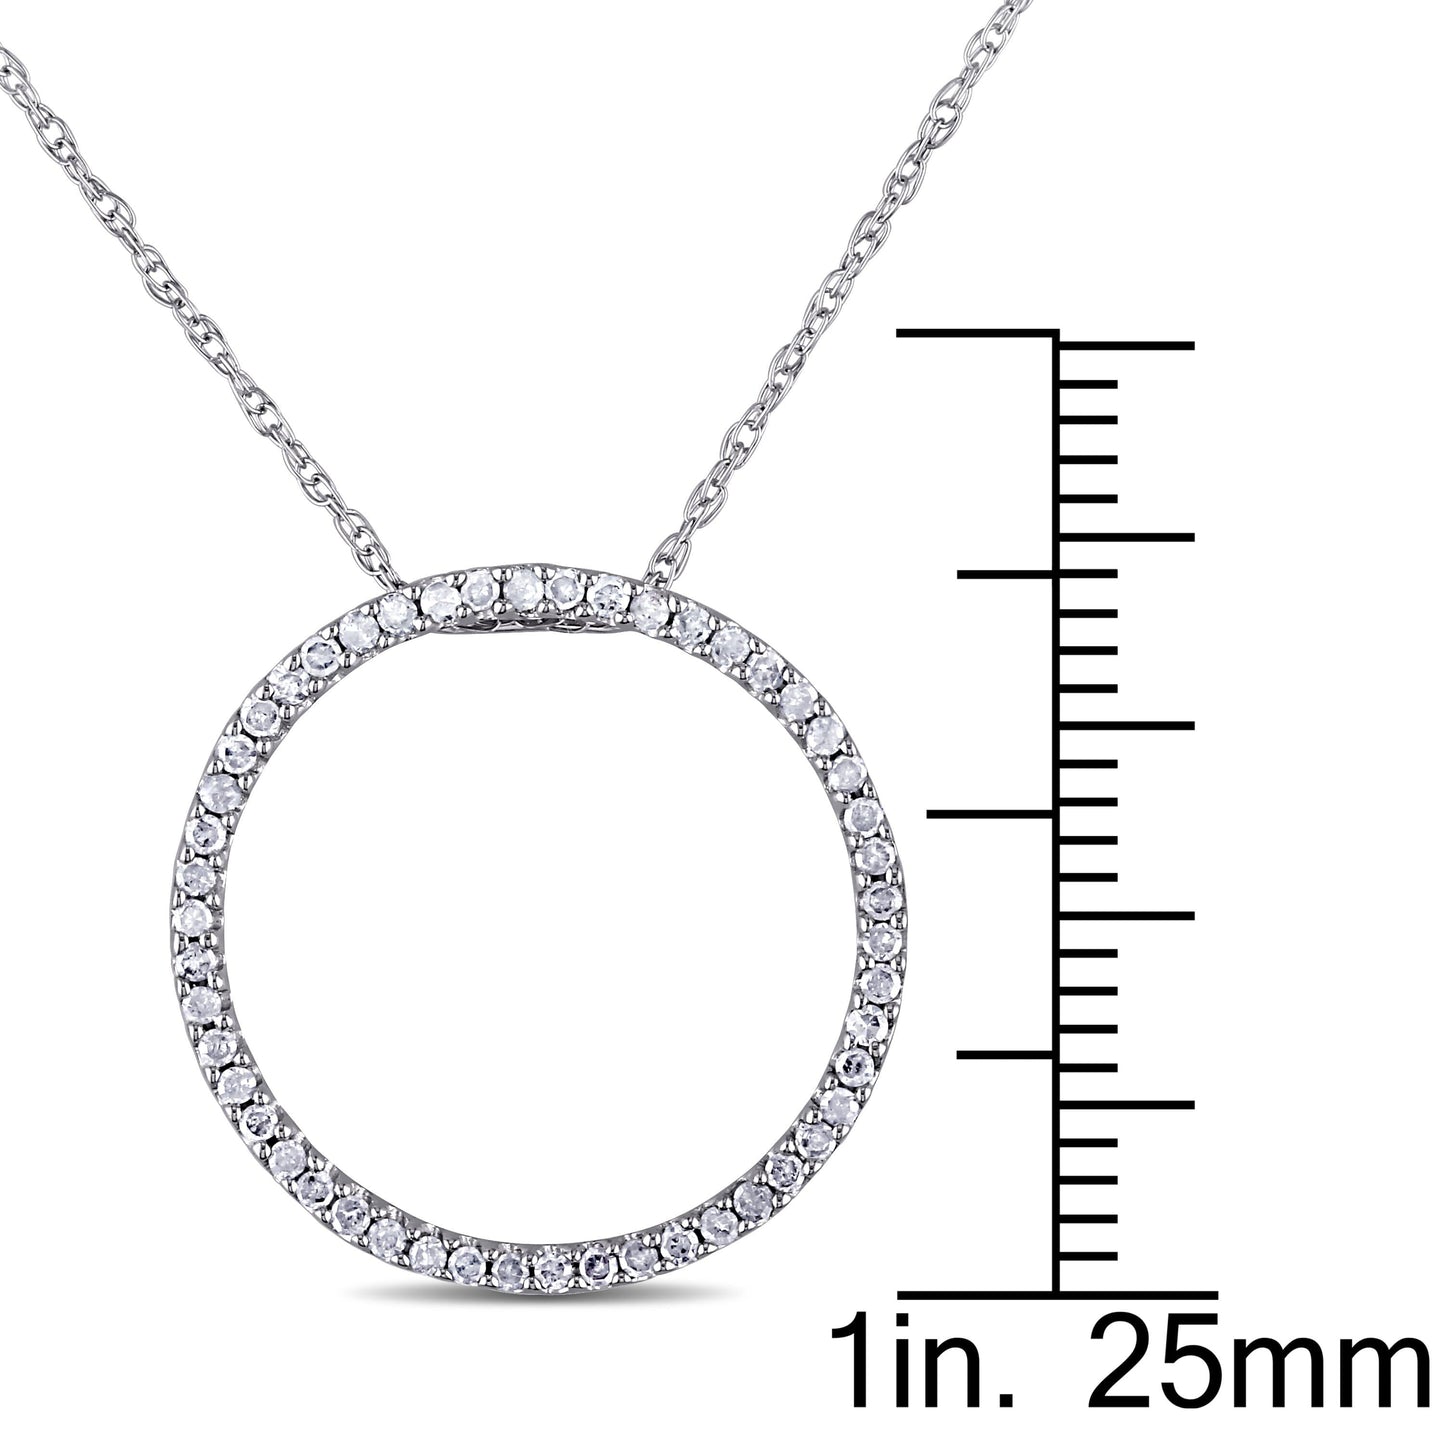 Julie Leah Diamond Circle Necklace in 10k White Gold